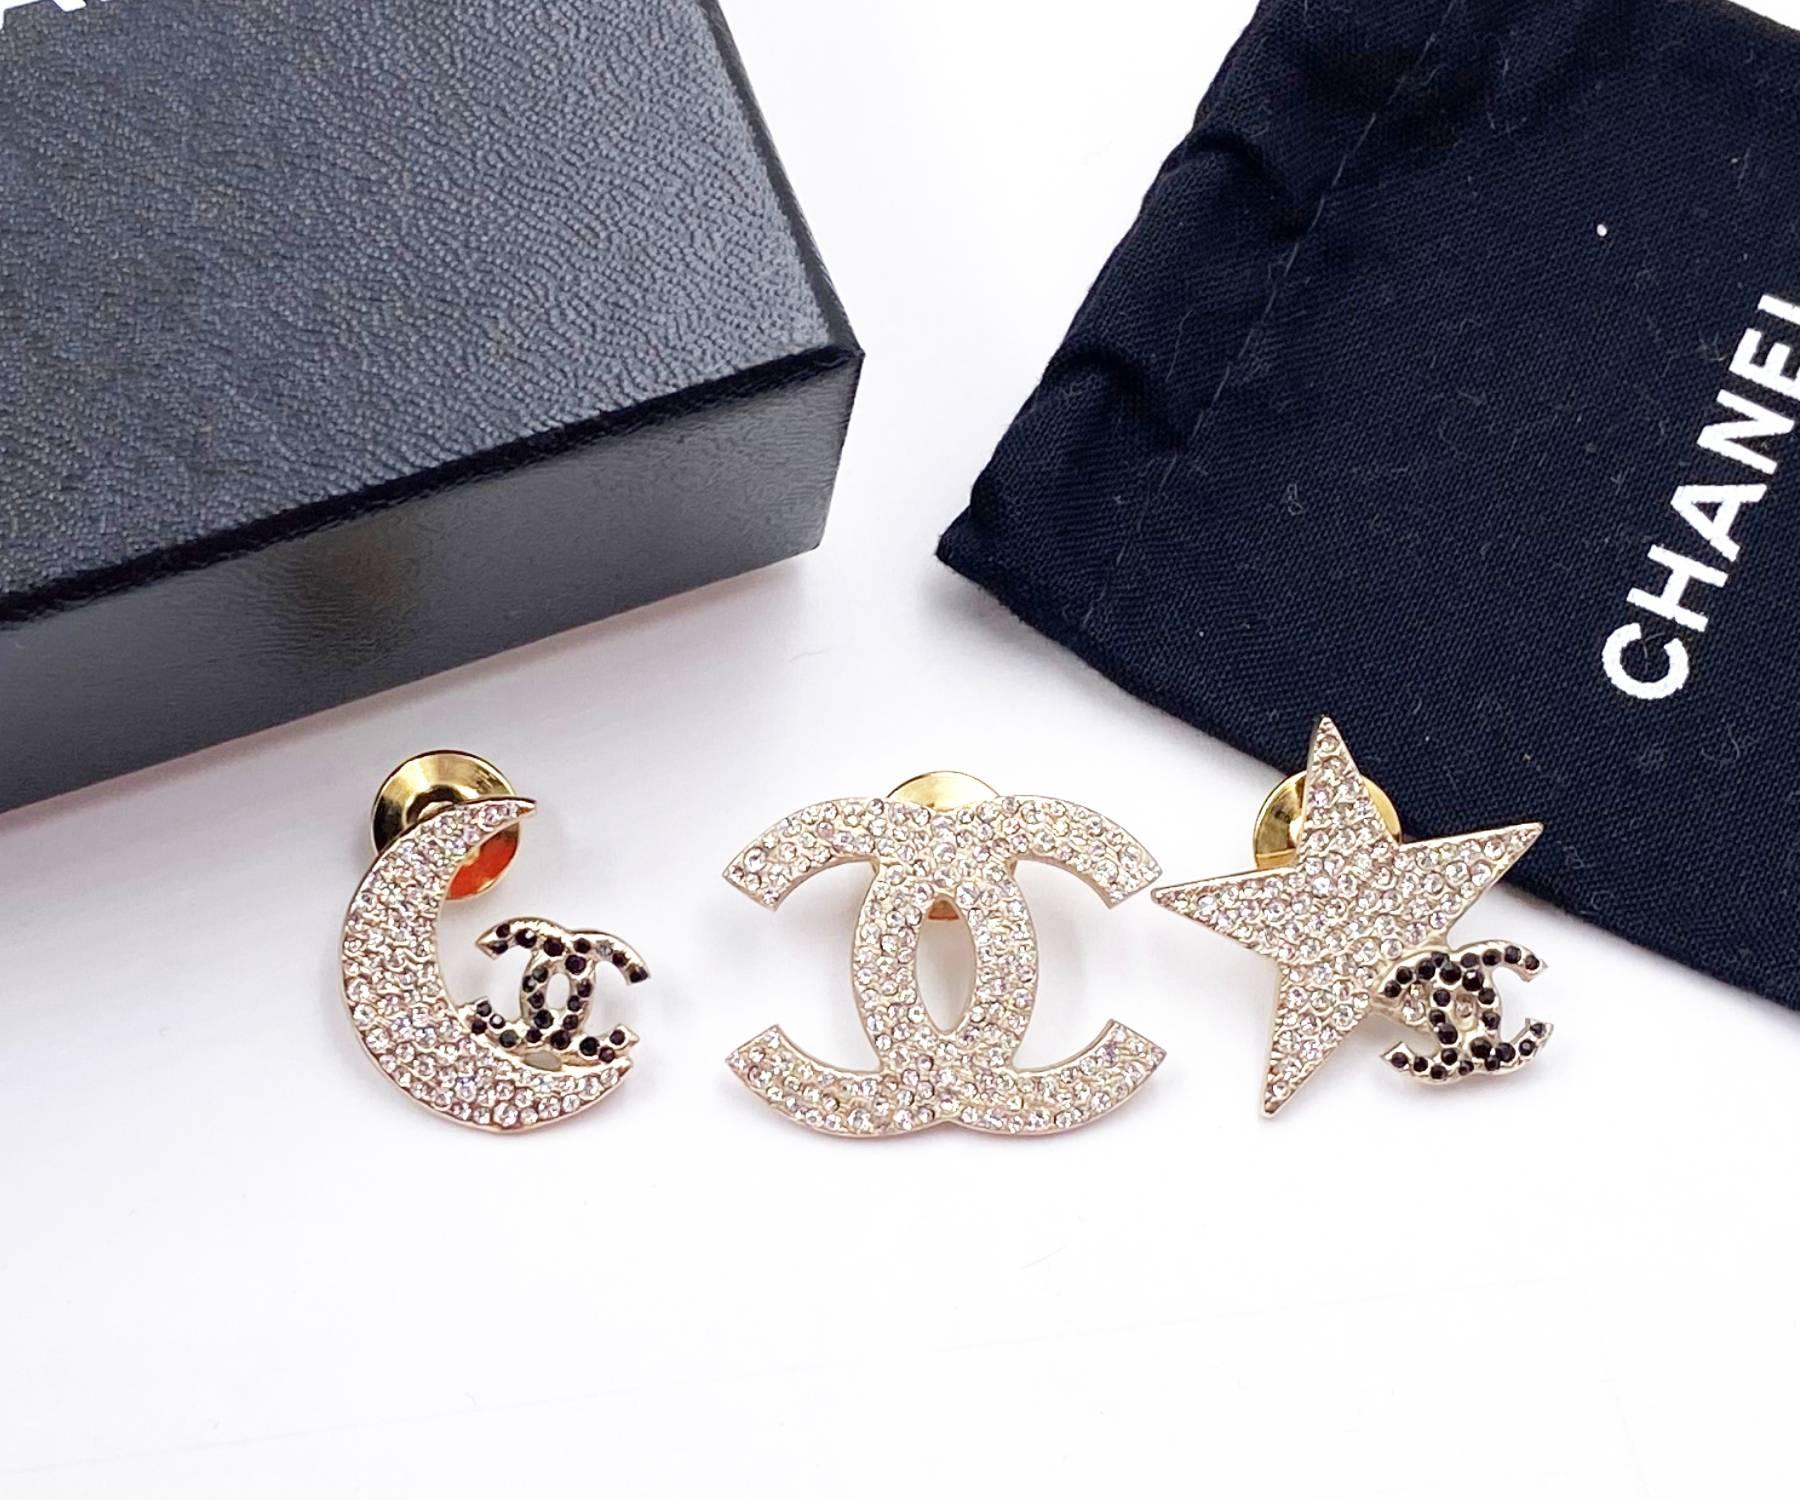 Chanel Rare Gold CC Moon Star Black Crystal 3 Pins

*Marked 08
*Made in Italy
*Comes with original box and dustbag

-CC is approximately 1.25″ x 1″
-Star is approximately 1.1″ x 1″.
-Moon is approximately 0.9″ x 0.9″.
-Very pretty and classic
-The